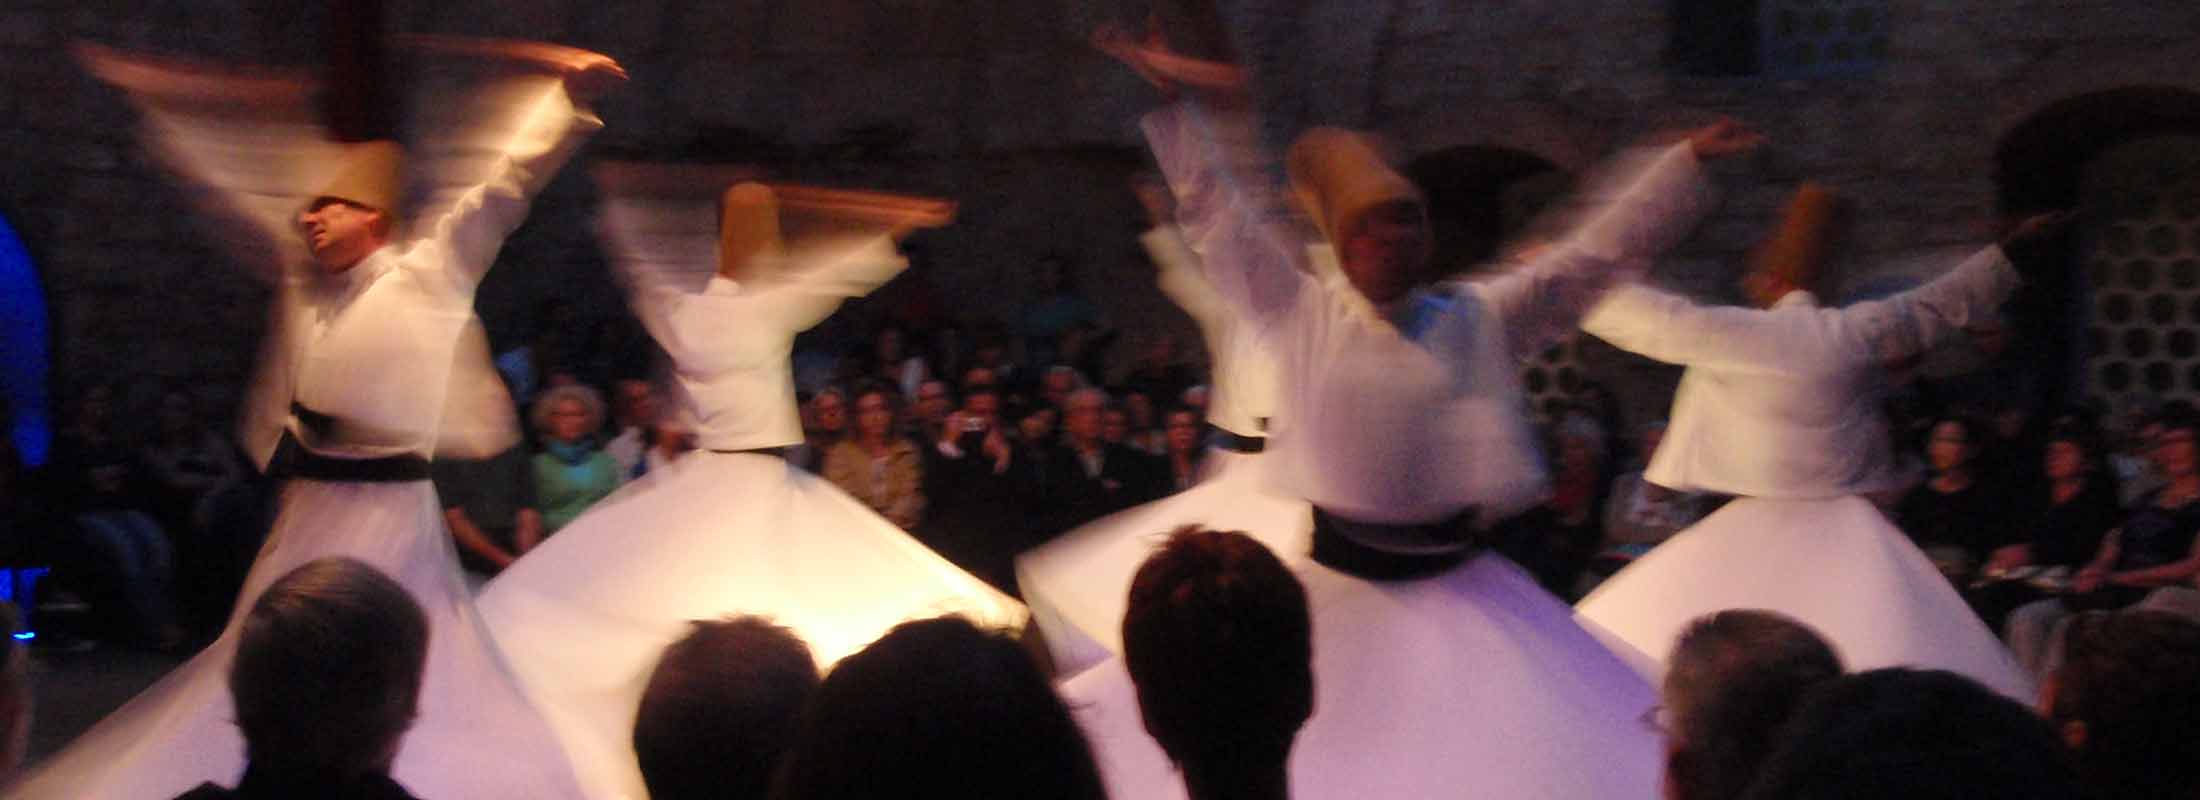 istanbul-whirling-dervishes-show-mystic-music